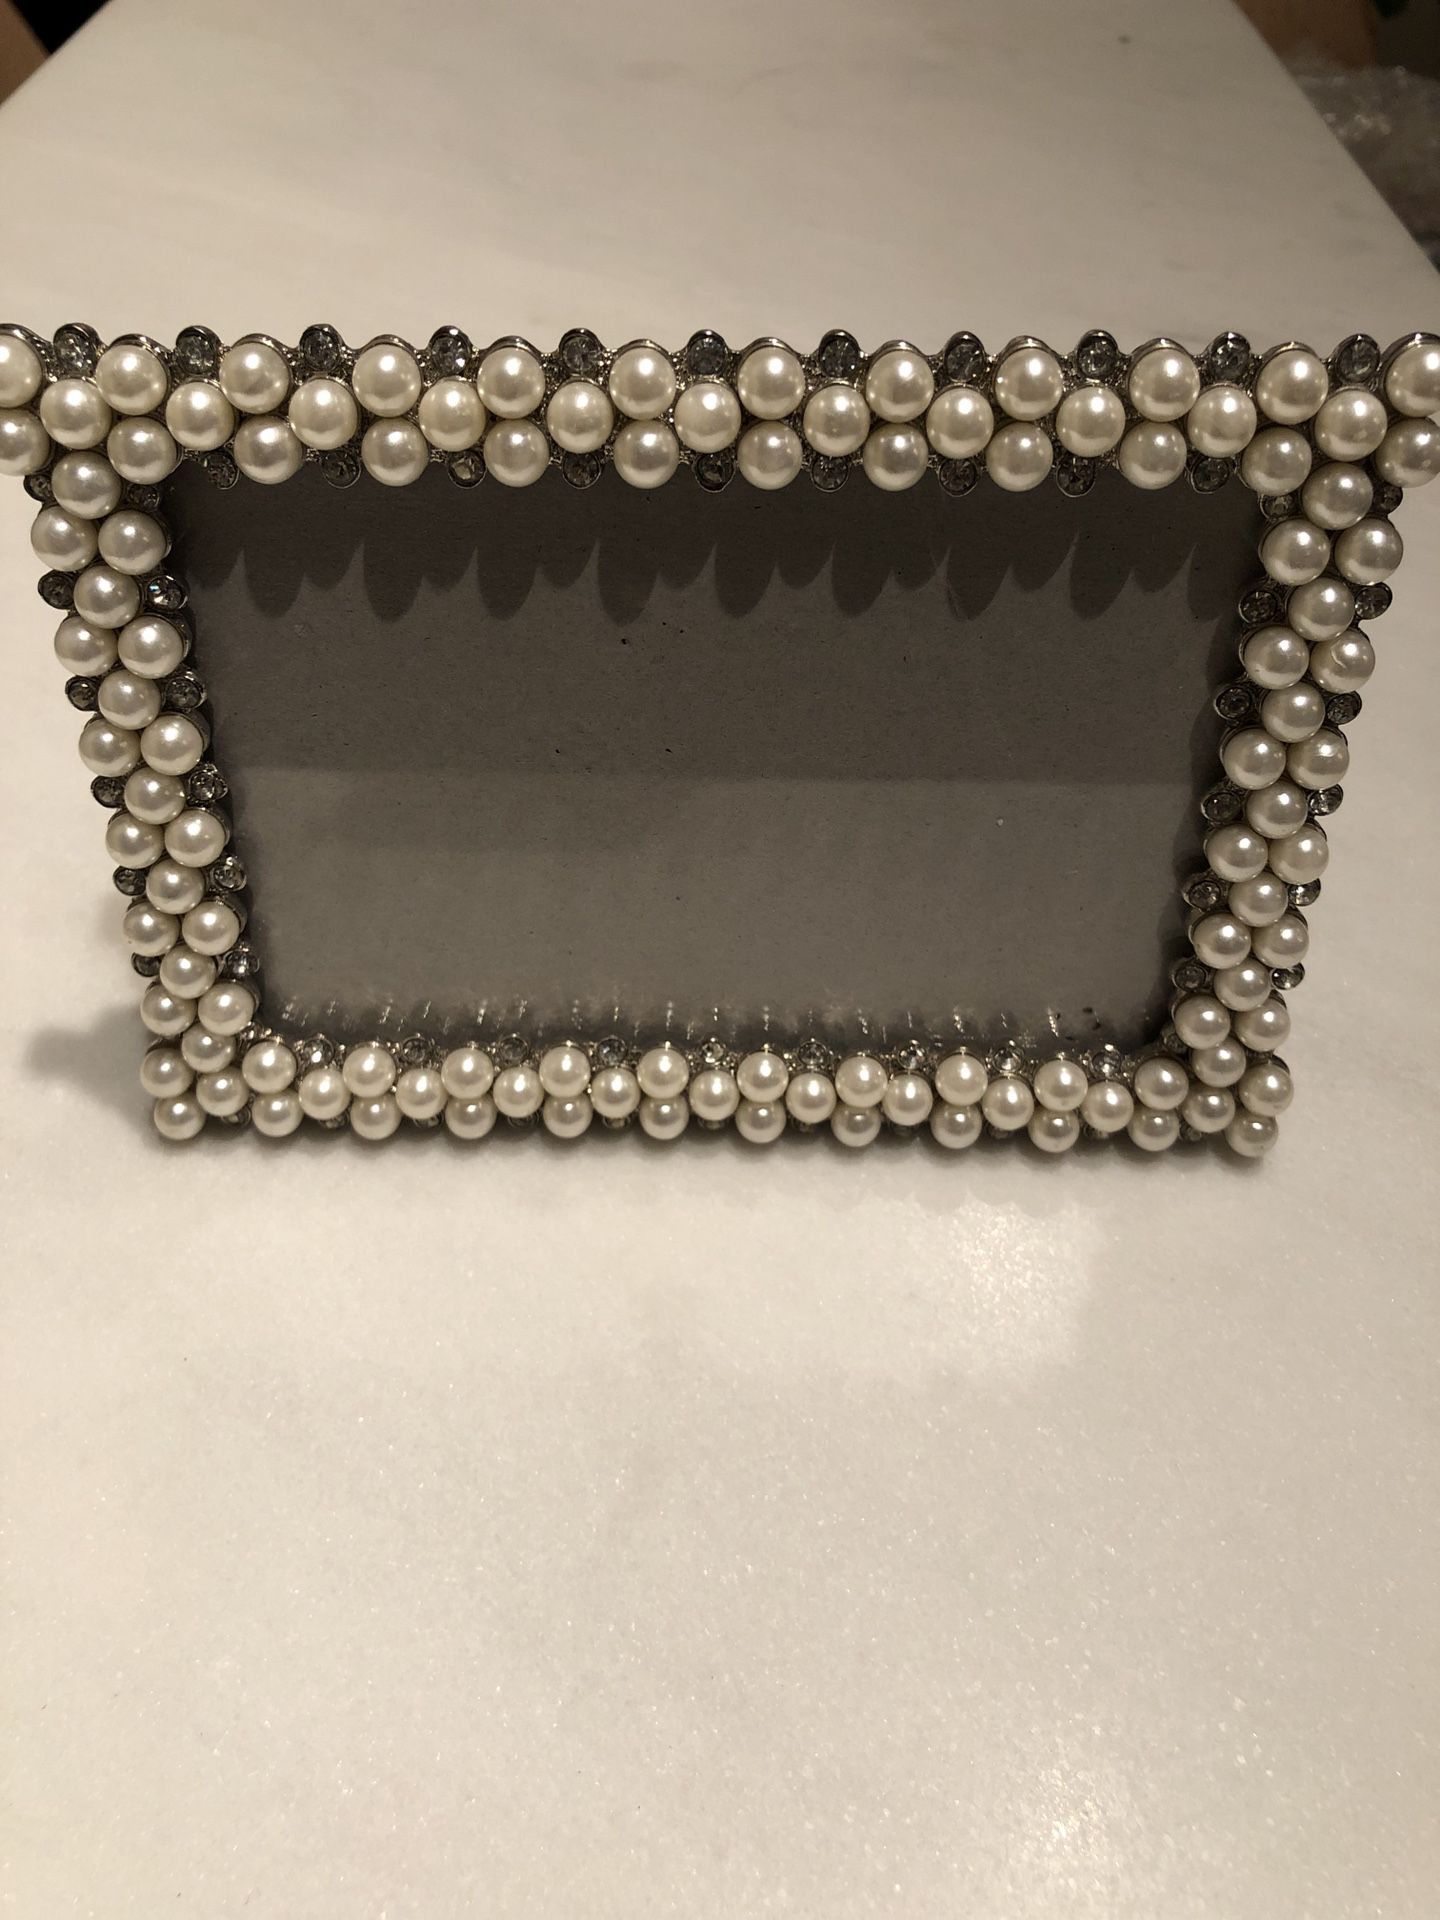 Pearl picture frame